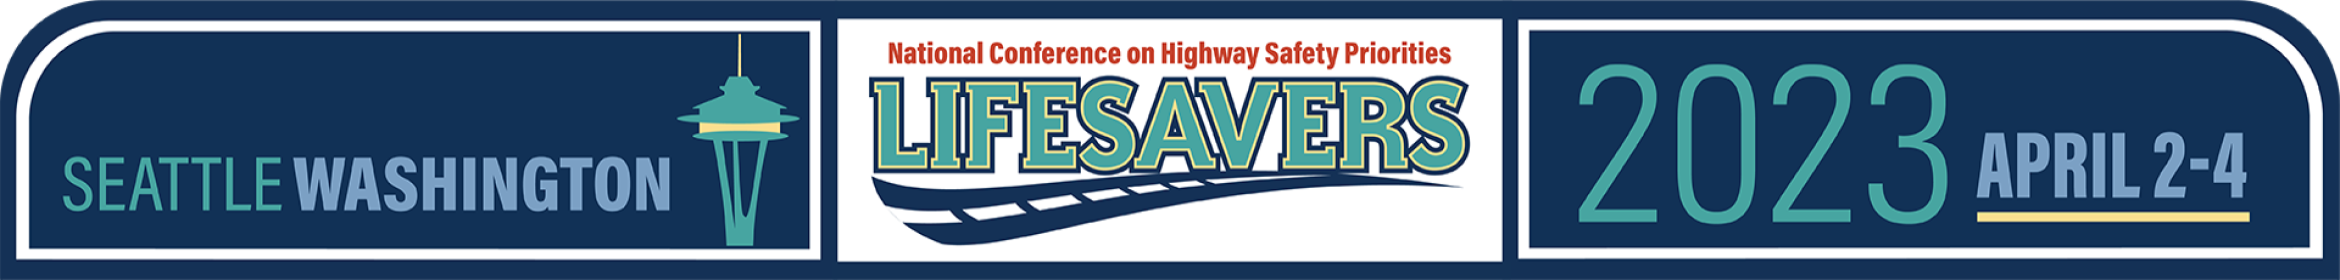 Lifesavers Conference 2023 Main banner